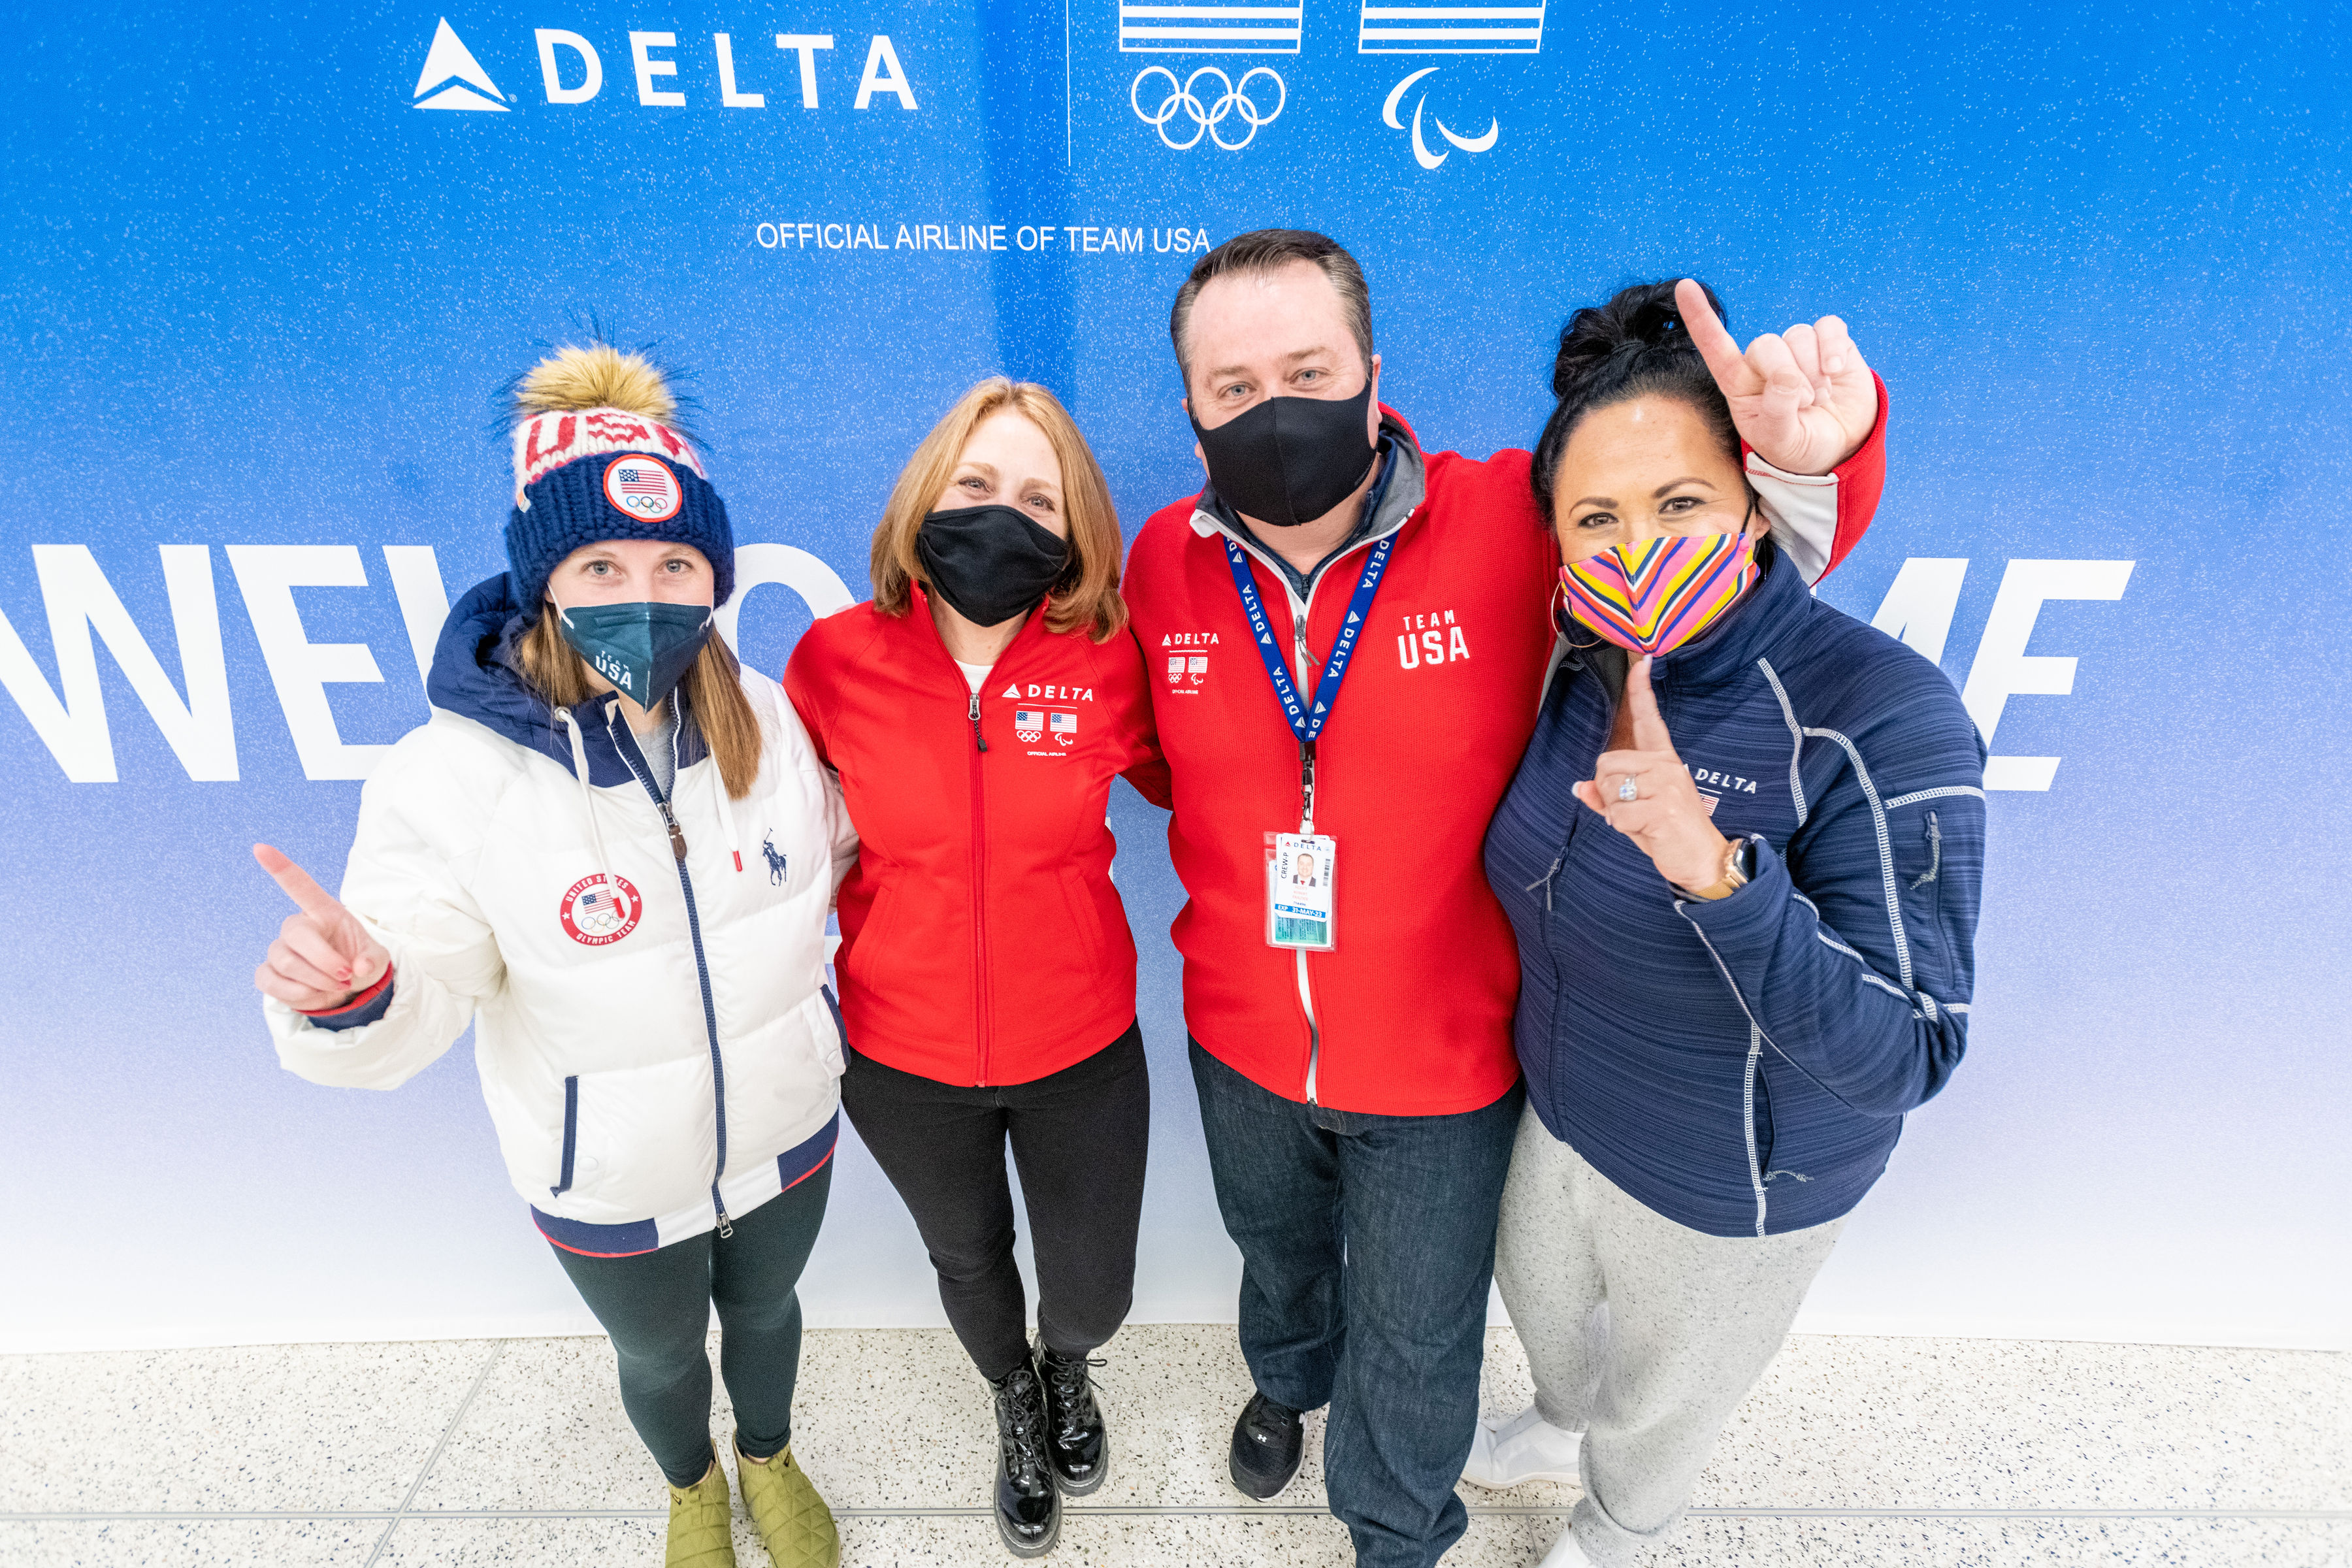 (Left to right) Nikki Leonard, fiancée of speed skater Ryan Pivorotto, Kris, a Delta Air Lines flight attendant, and Nikki's mother, Scott, a Delta Air Lines co-pilot and uncle of figure skater Brandon Frazier , and Heather, wife of Scott